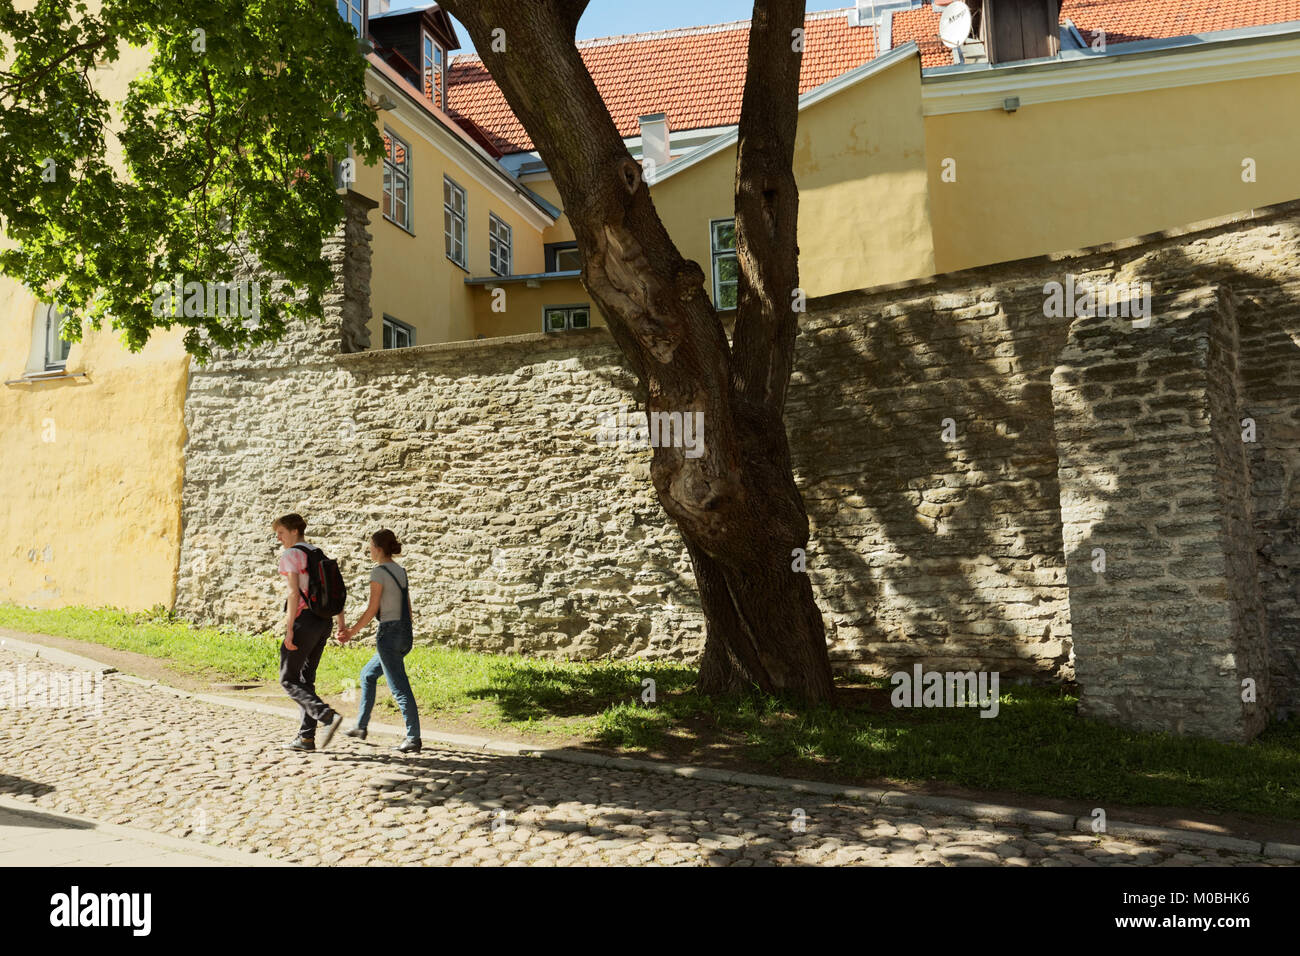 Tallinn, Estonia - June 10, 2017: Young people walking on the street of Old city. The Old Town is one of the best preserved medieval cities in Europe  Stock Photo